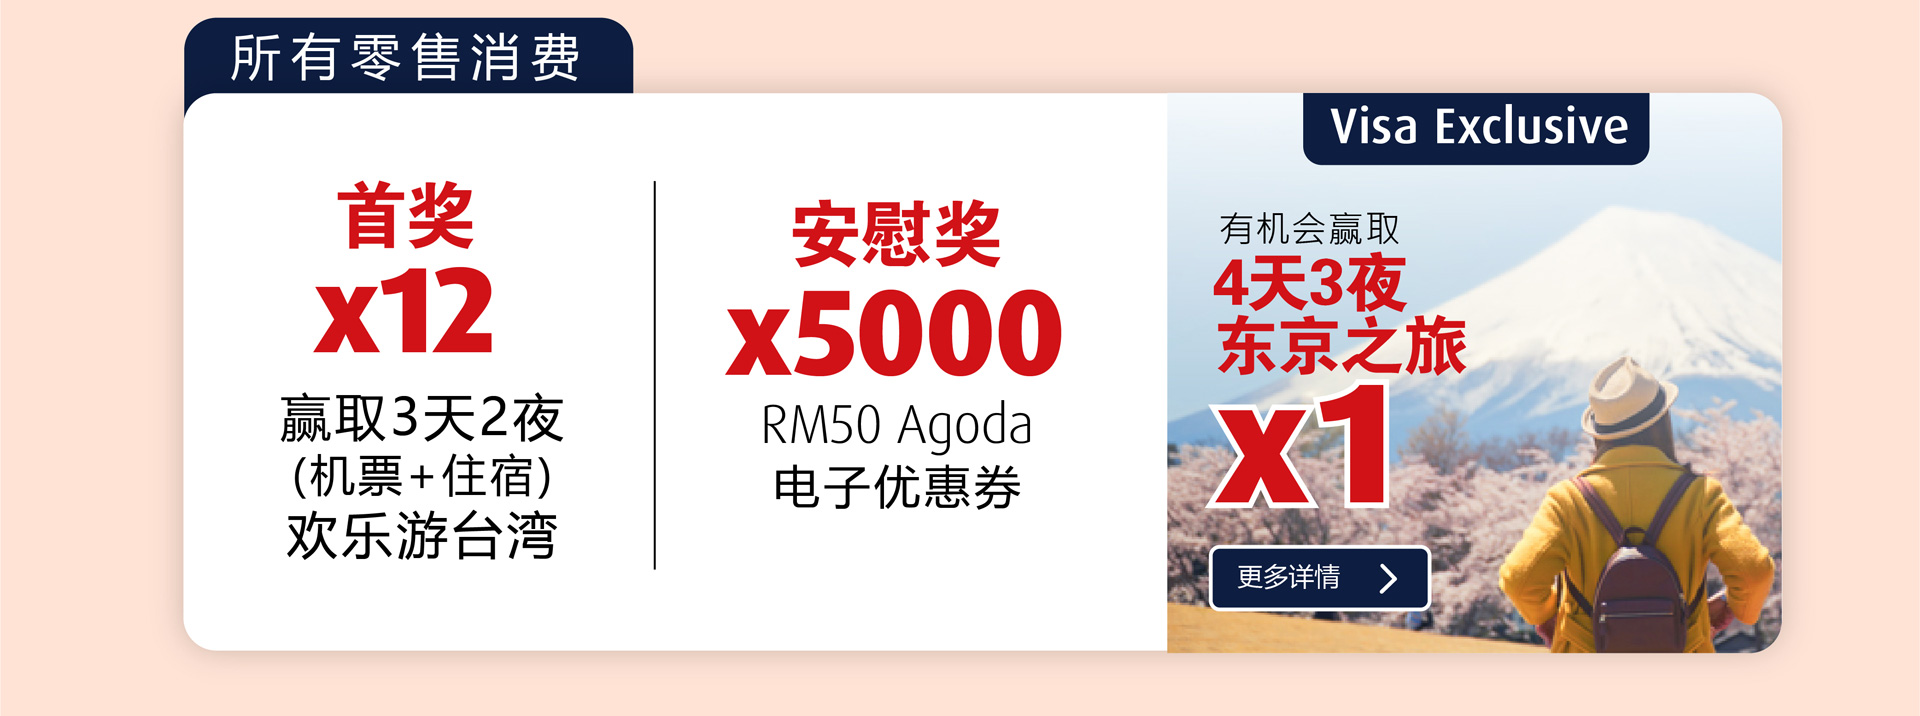 HLB CNY 2020 Credit Cards Promotions